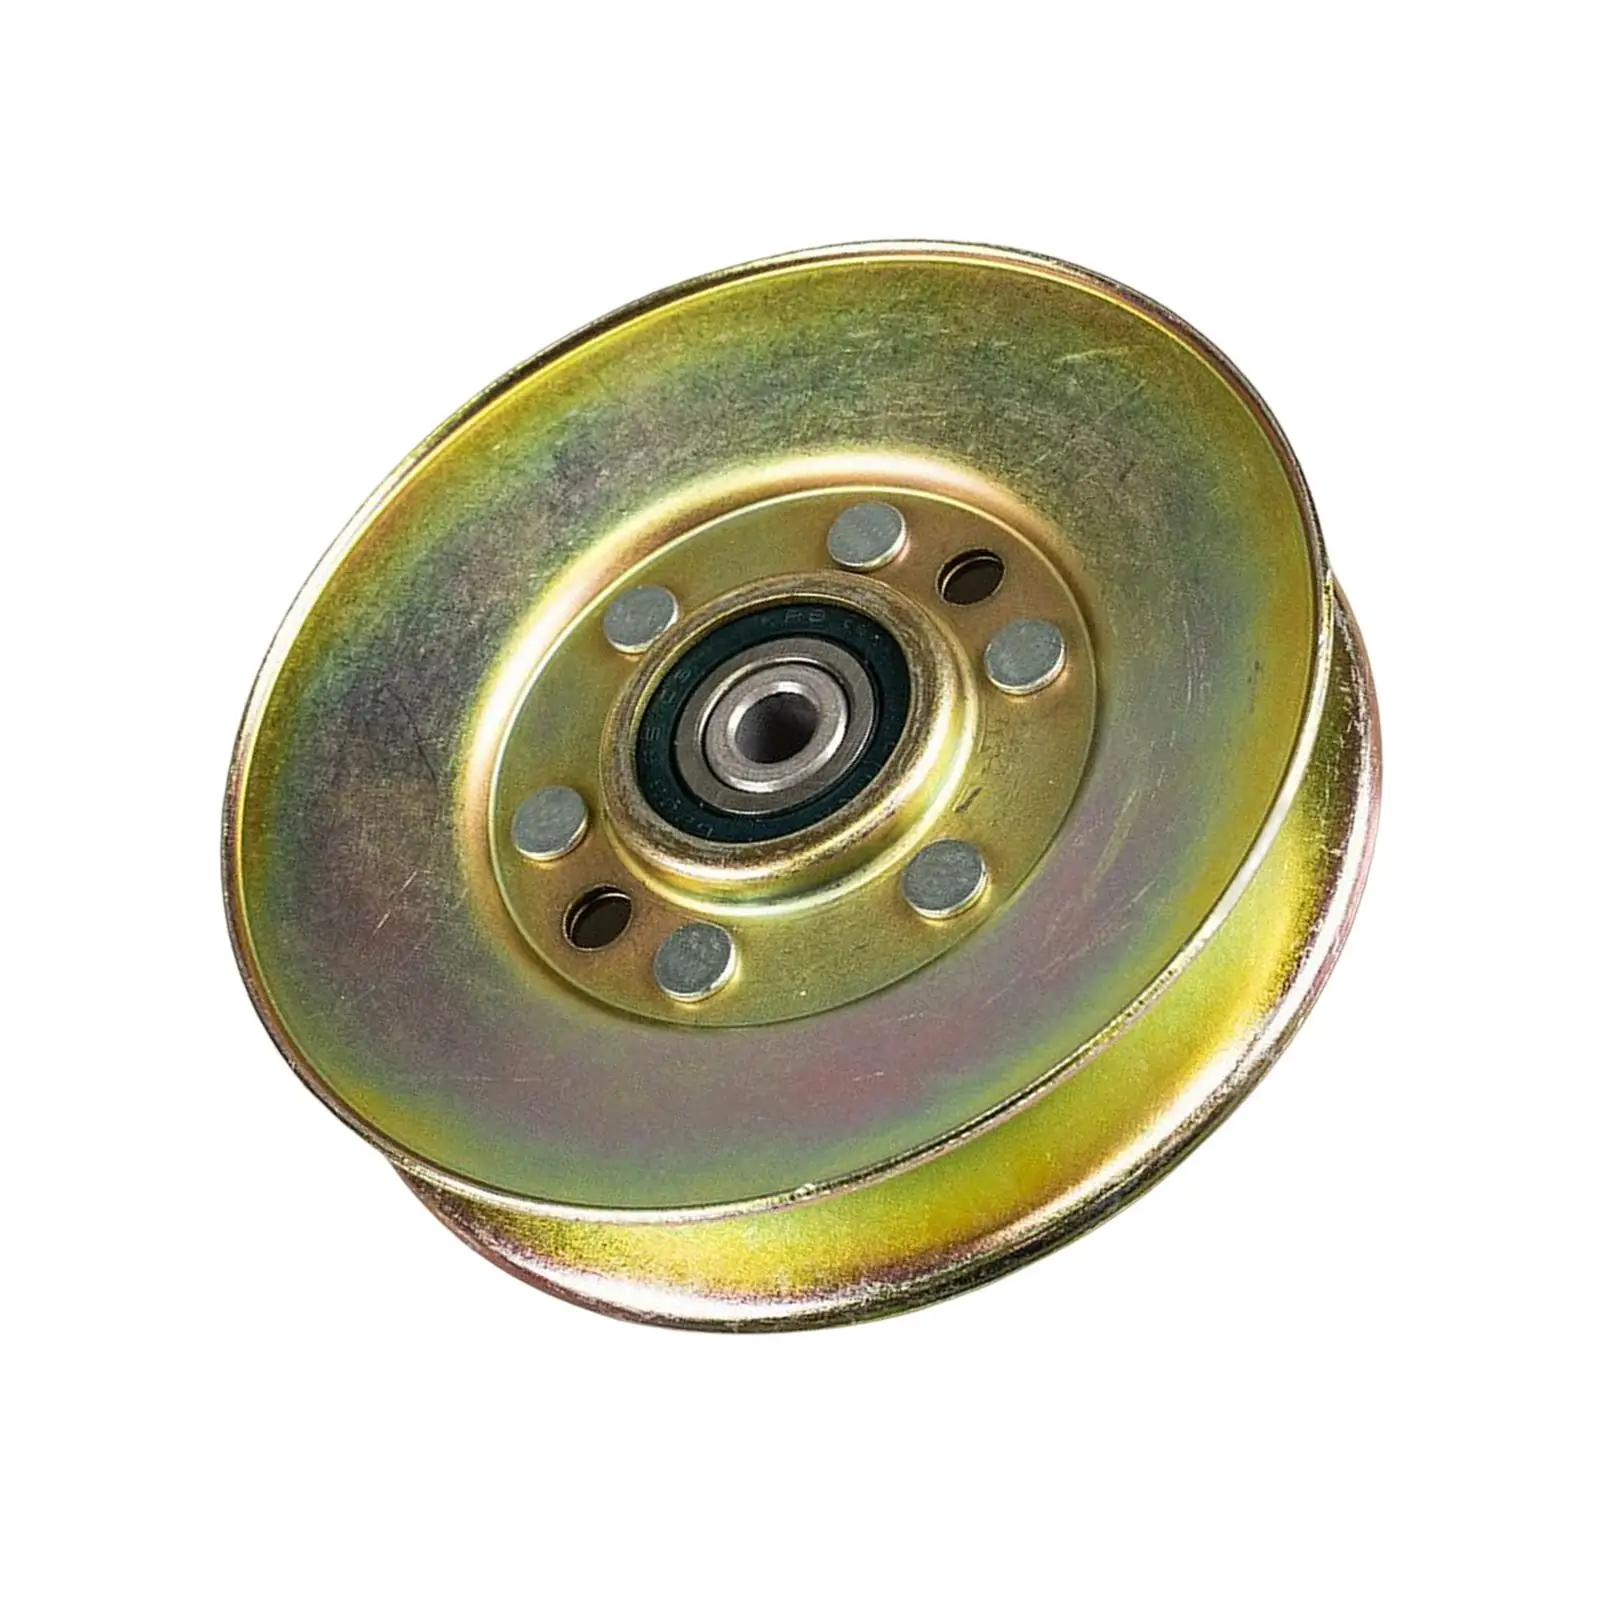 Idler Pulley Replaces Attachment Lawn Mower Pulley for MTD 756-04522 Accs